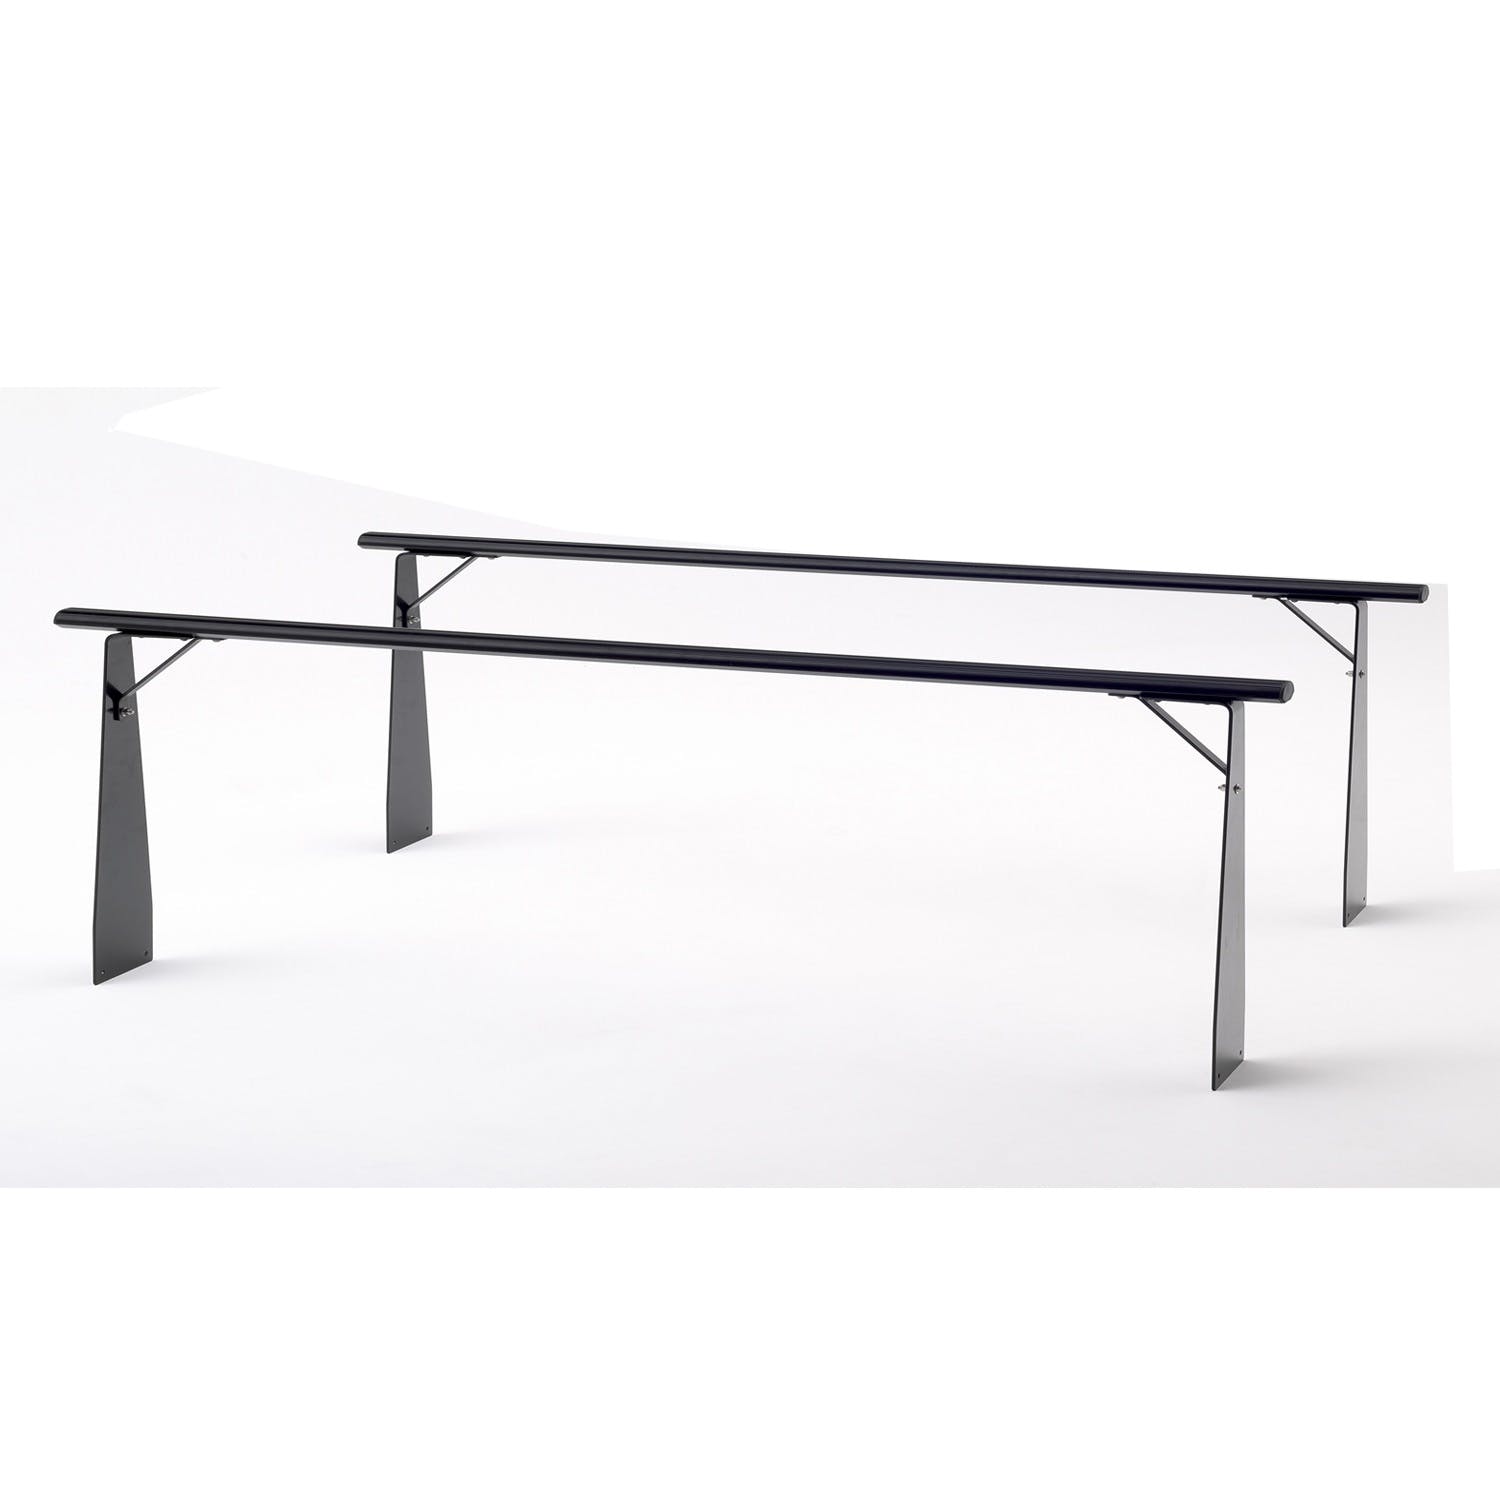 BAK Industries FTR177-1 BAKFlip CS Rack ONLY  Full Size, 77 inches wide x 27 inches tall